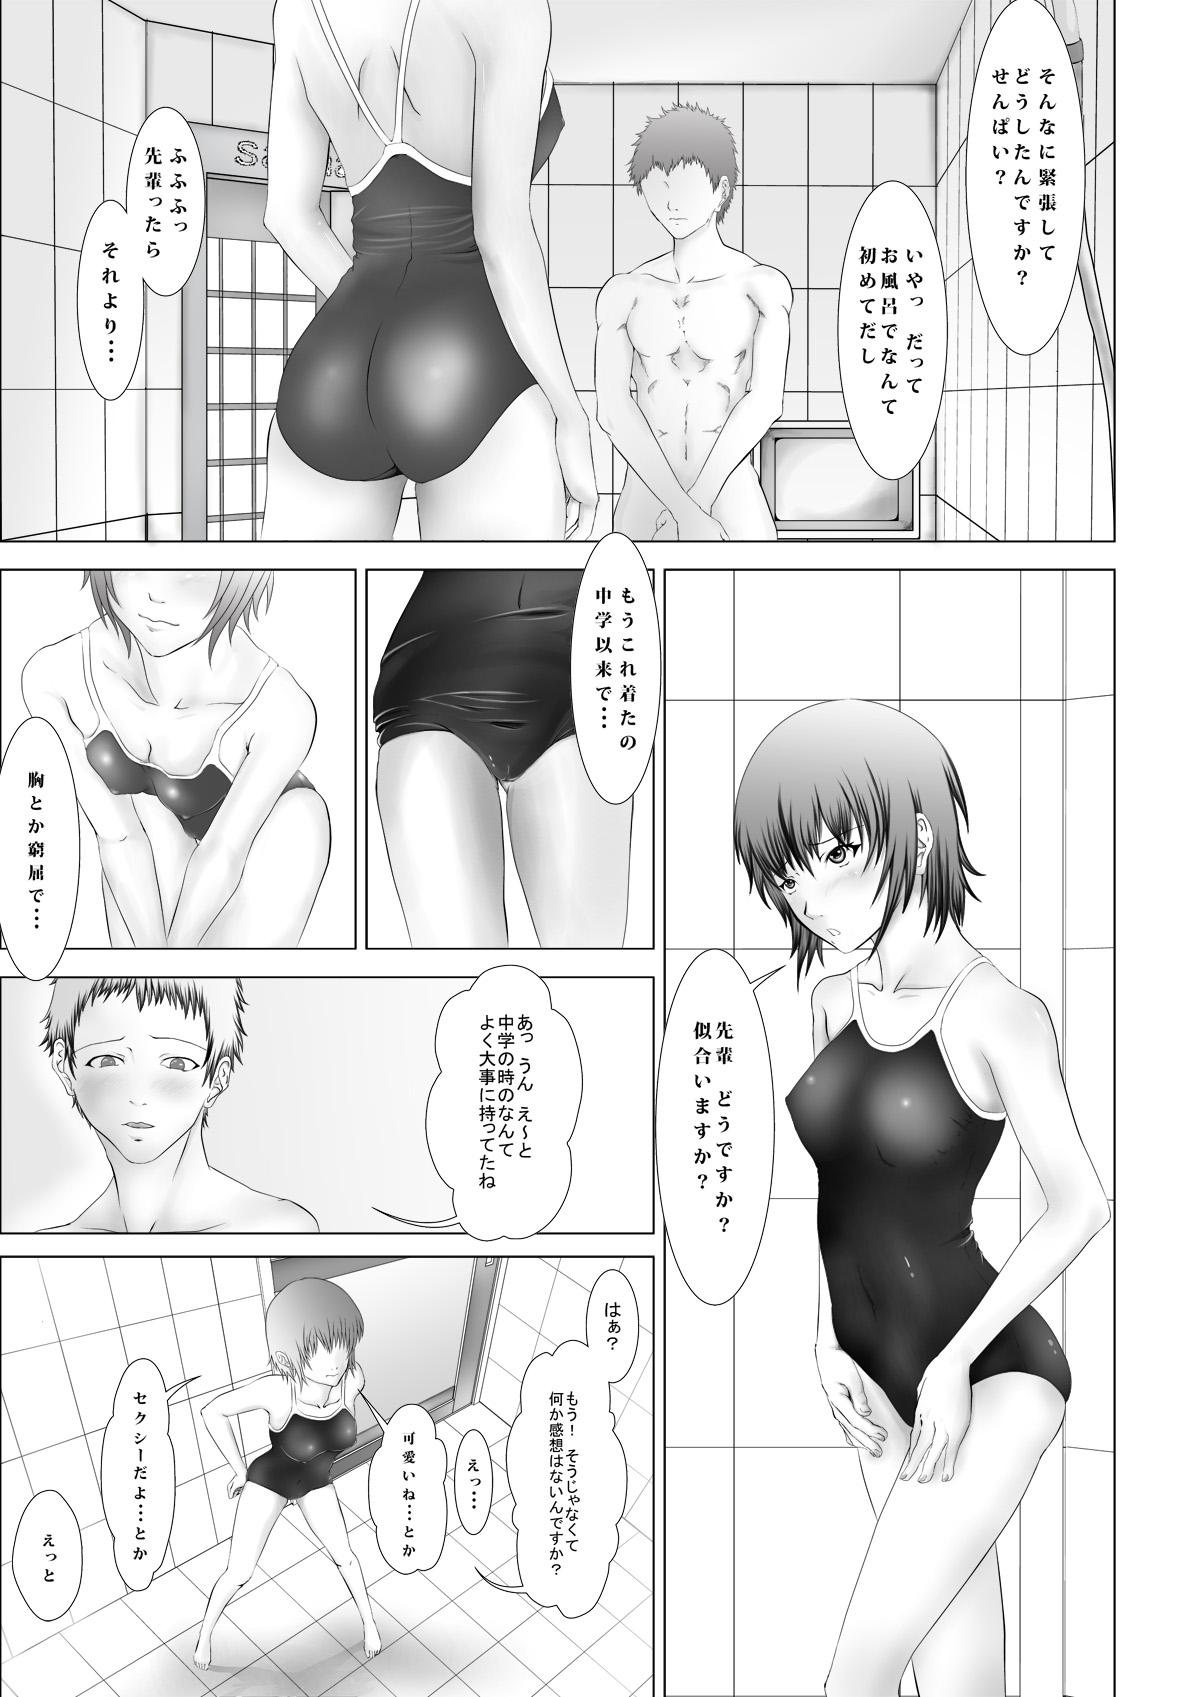 Old And Young 急所責めマニアックスvol.3 Body Massage - Page 2